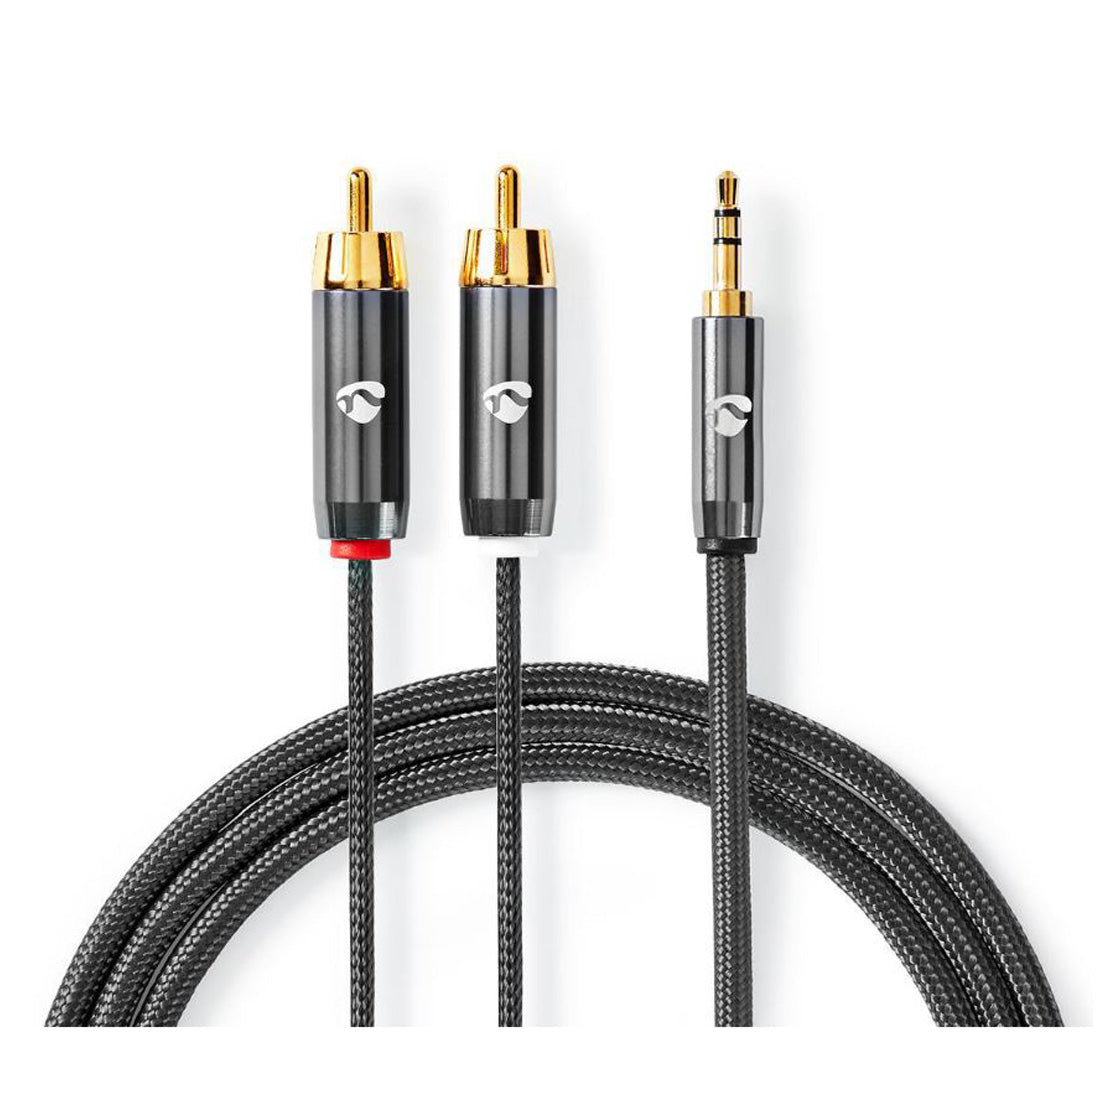 Nedis Stereo Audio Cable 3.5mm 2 x RCA Male, Gold Plated Cable Length 3.5m